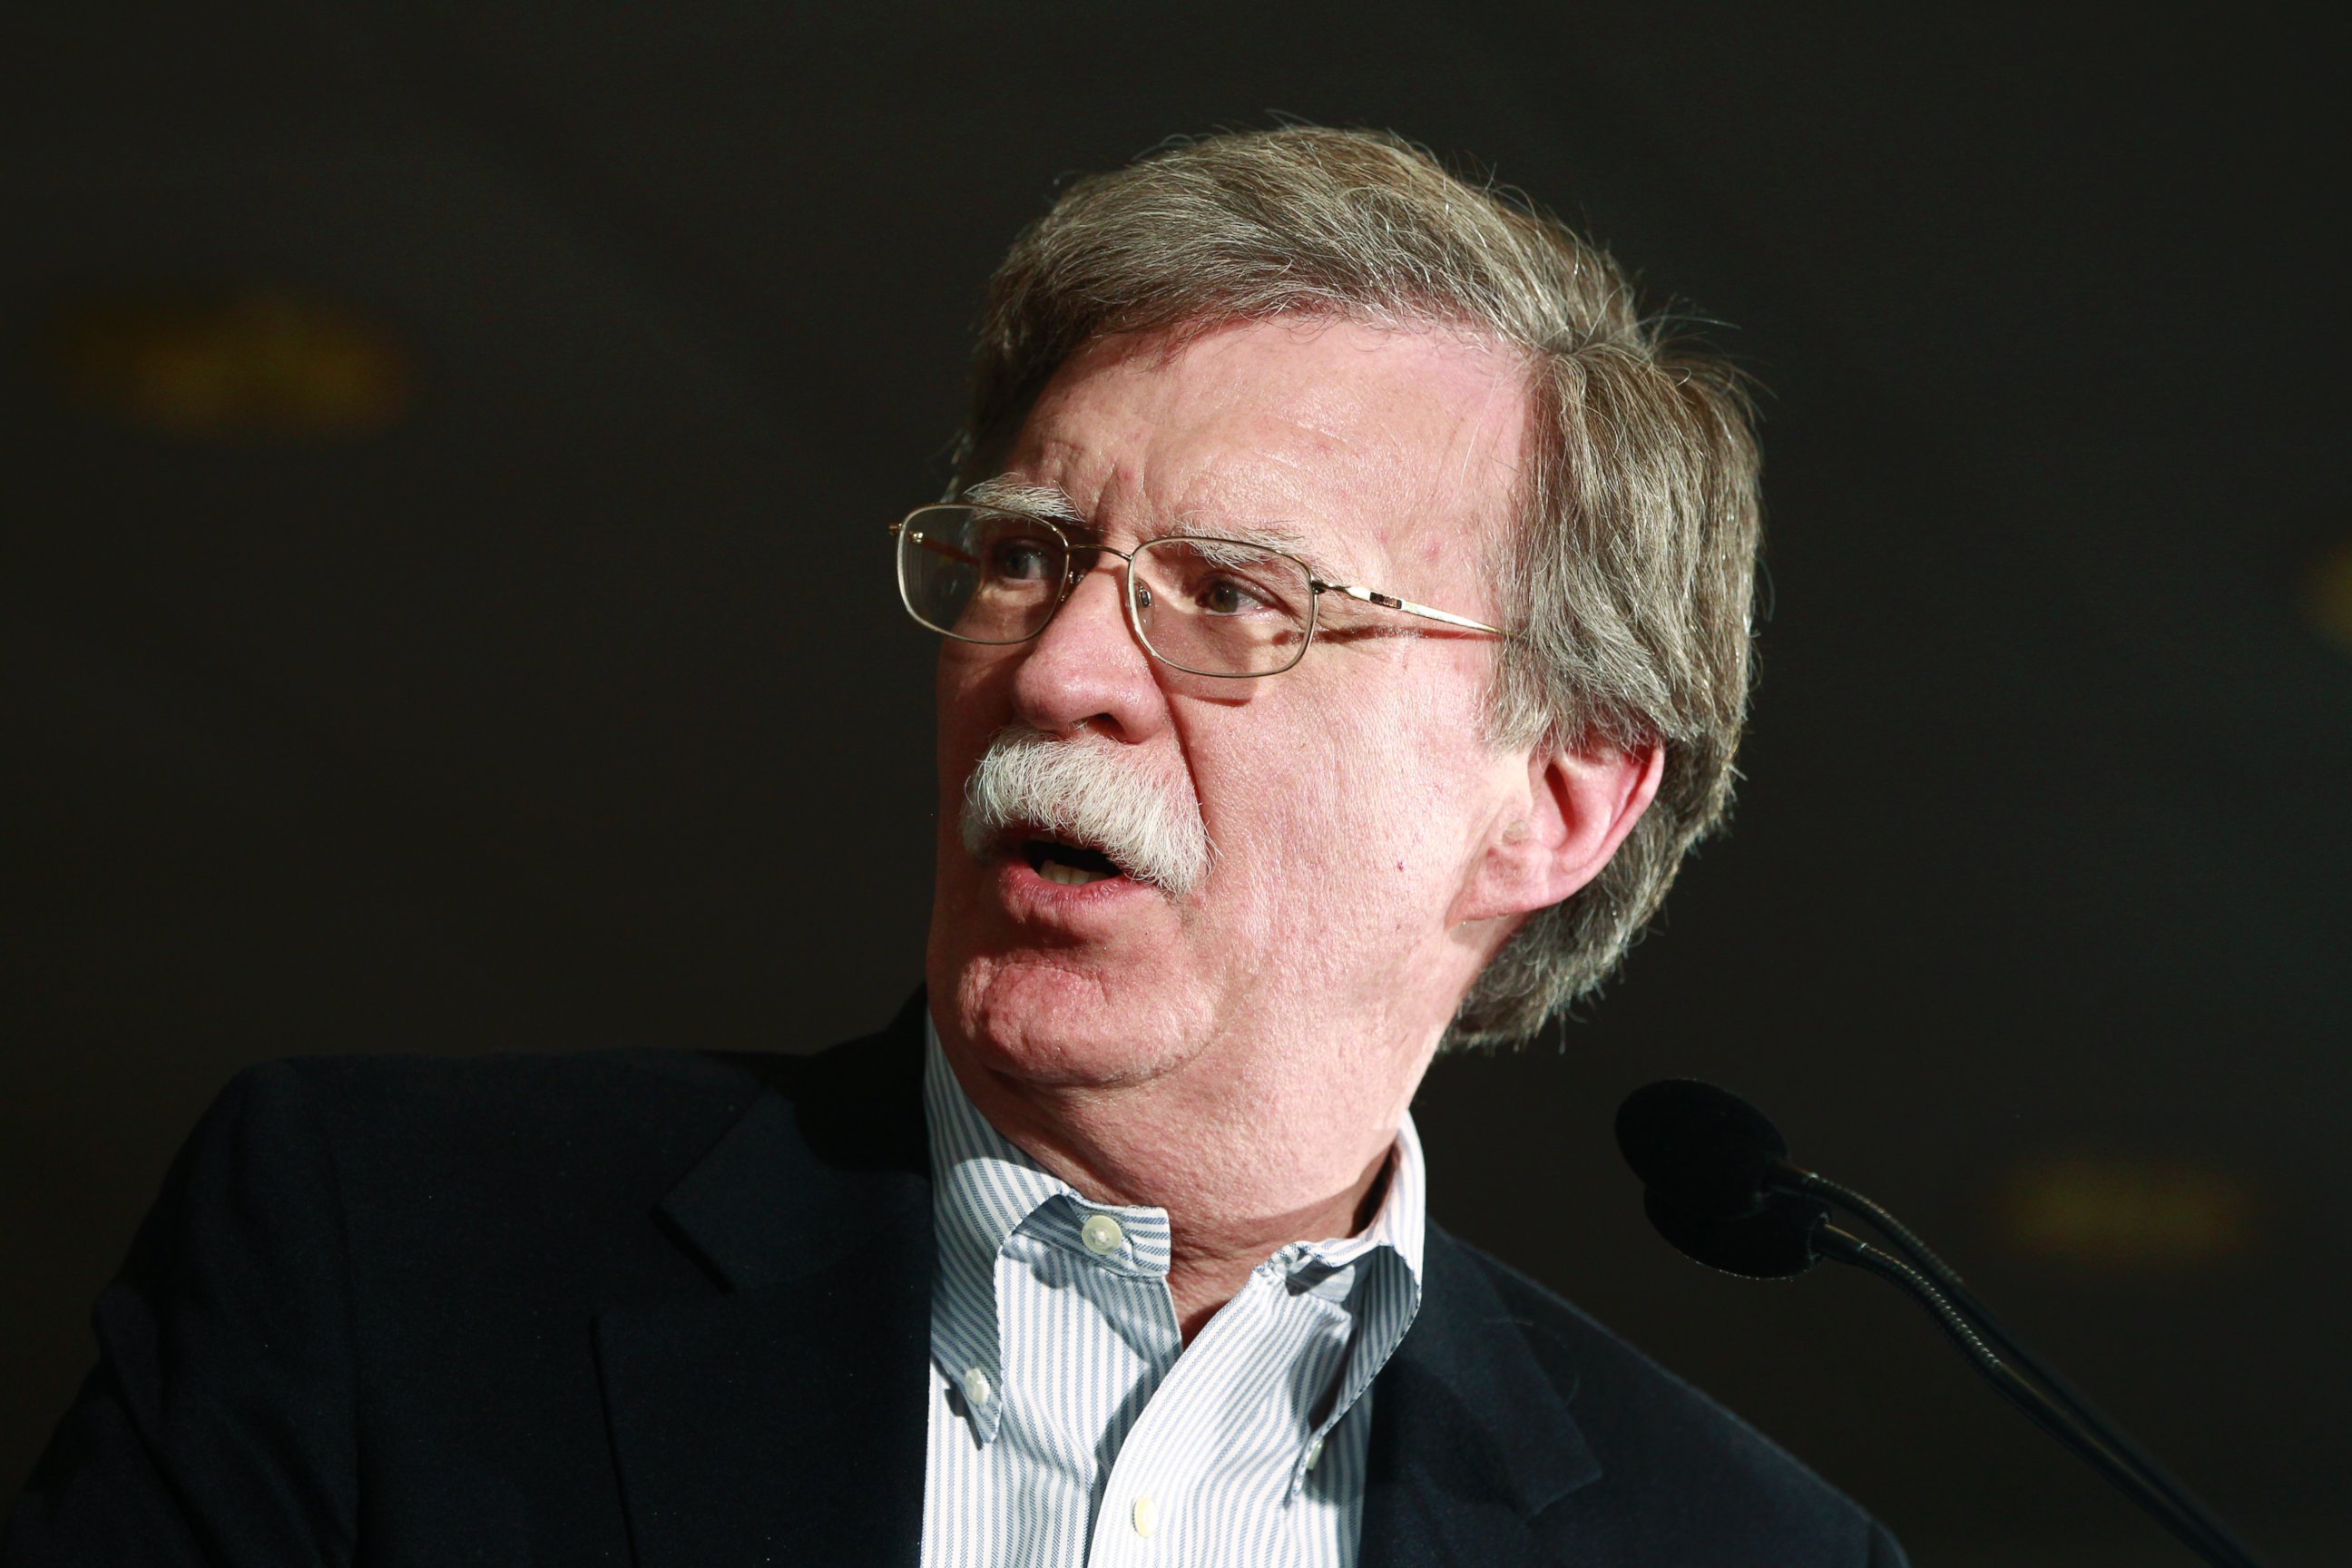 PHOTO: Former United Nations Ambassador John Bolton campaigns for Republican presidential candidate, former Massachusetts Governor Mitt Romney, in Hilton Head, South Carolina, Jan. 13, 2012.